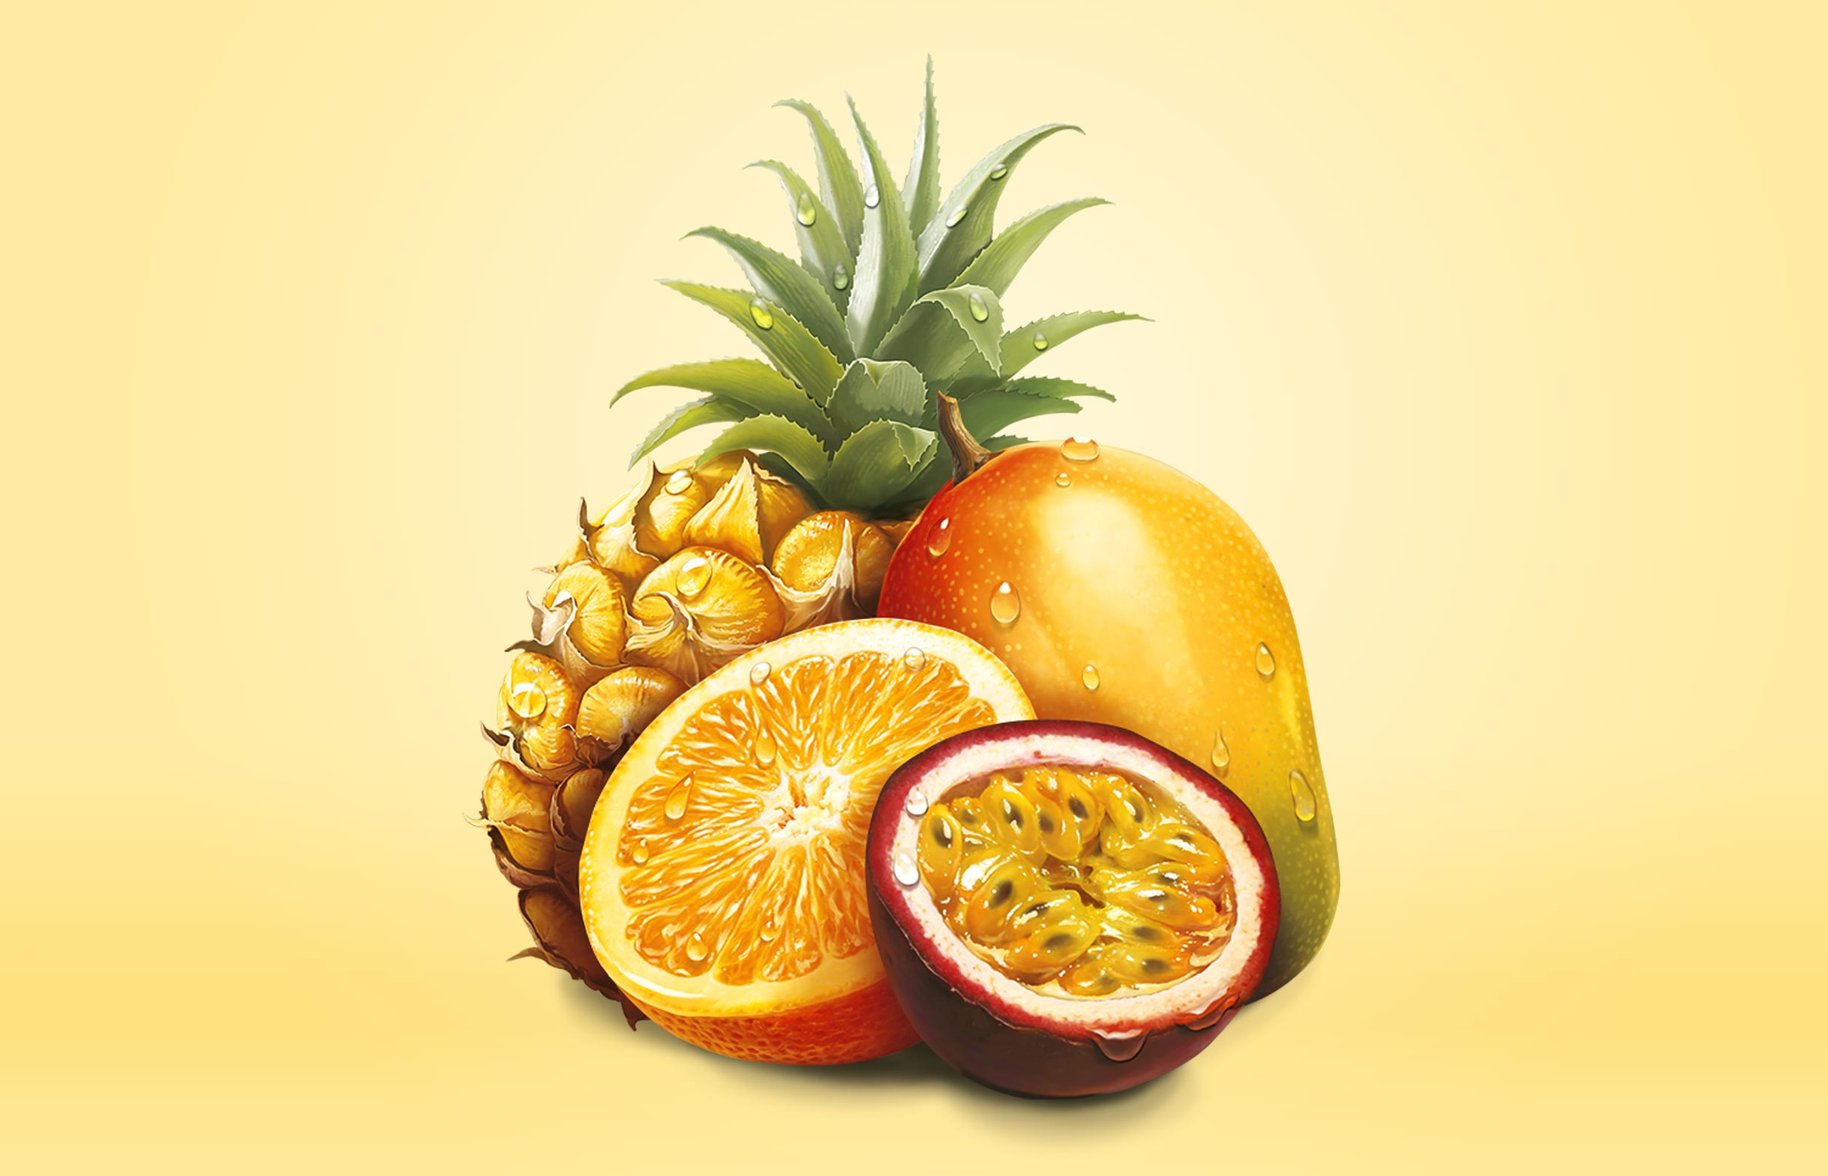 Just Juice topical fruit illustration 